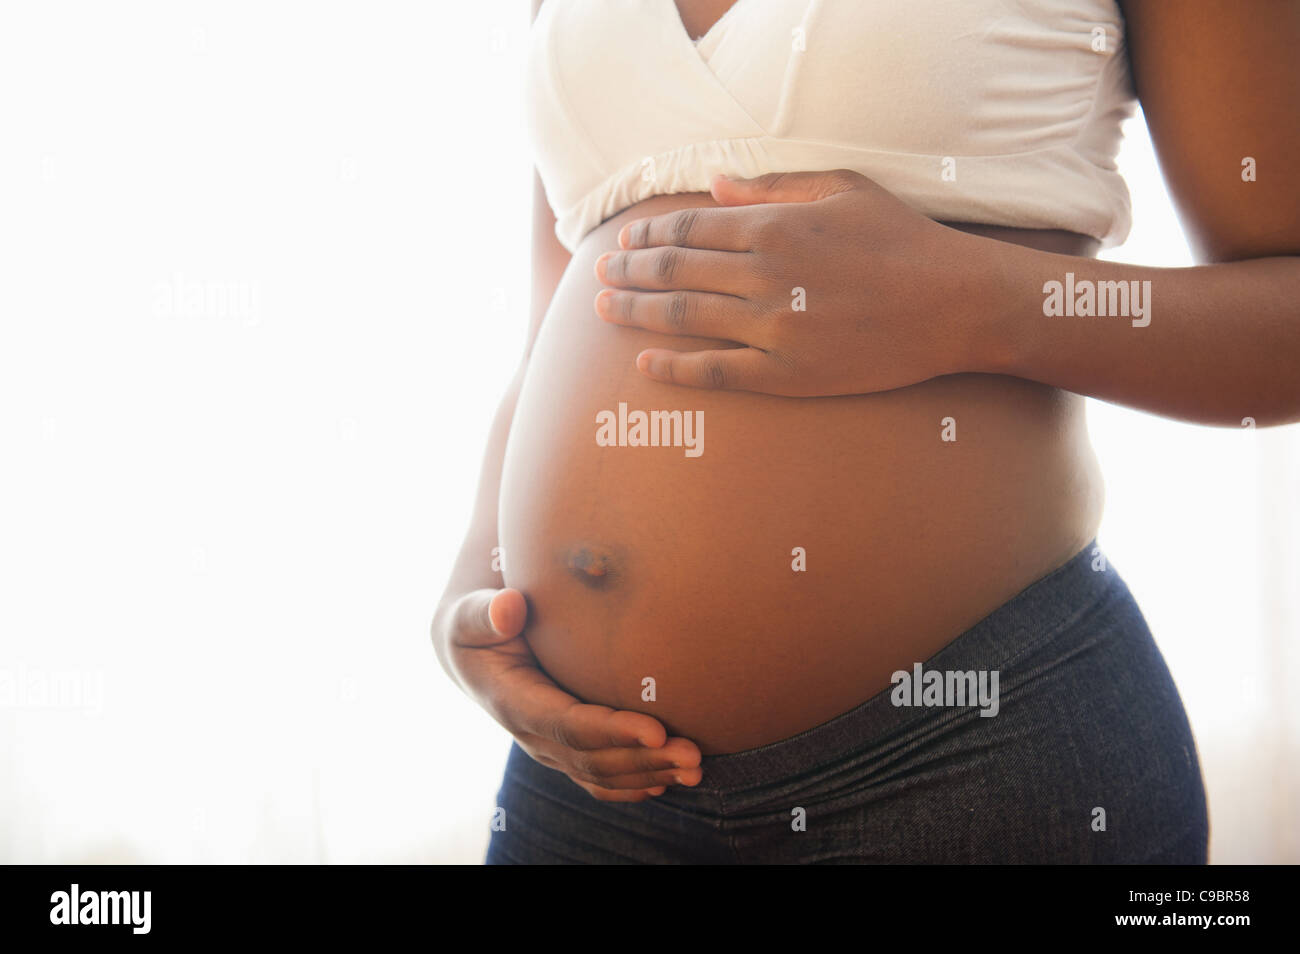 Close-up view of woman's hands cradling pregnant stomach, Johannesburg, Gauteng Province, South Africa Stock Photo